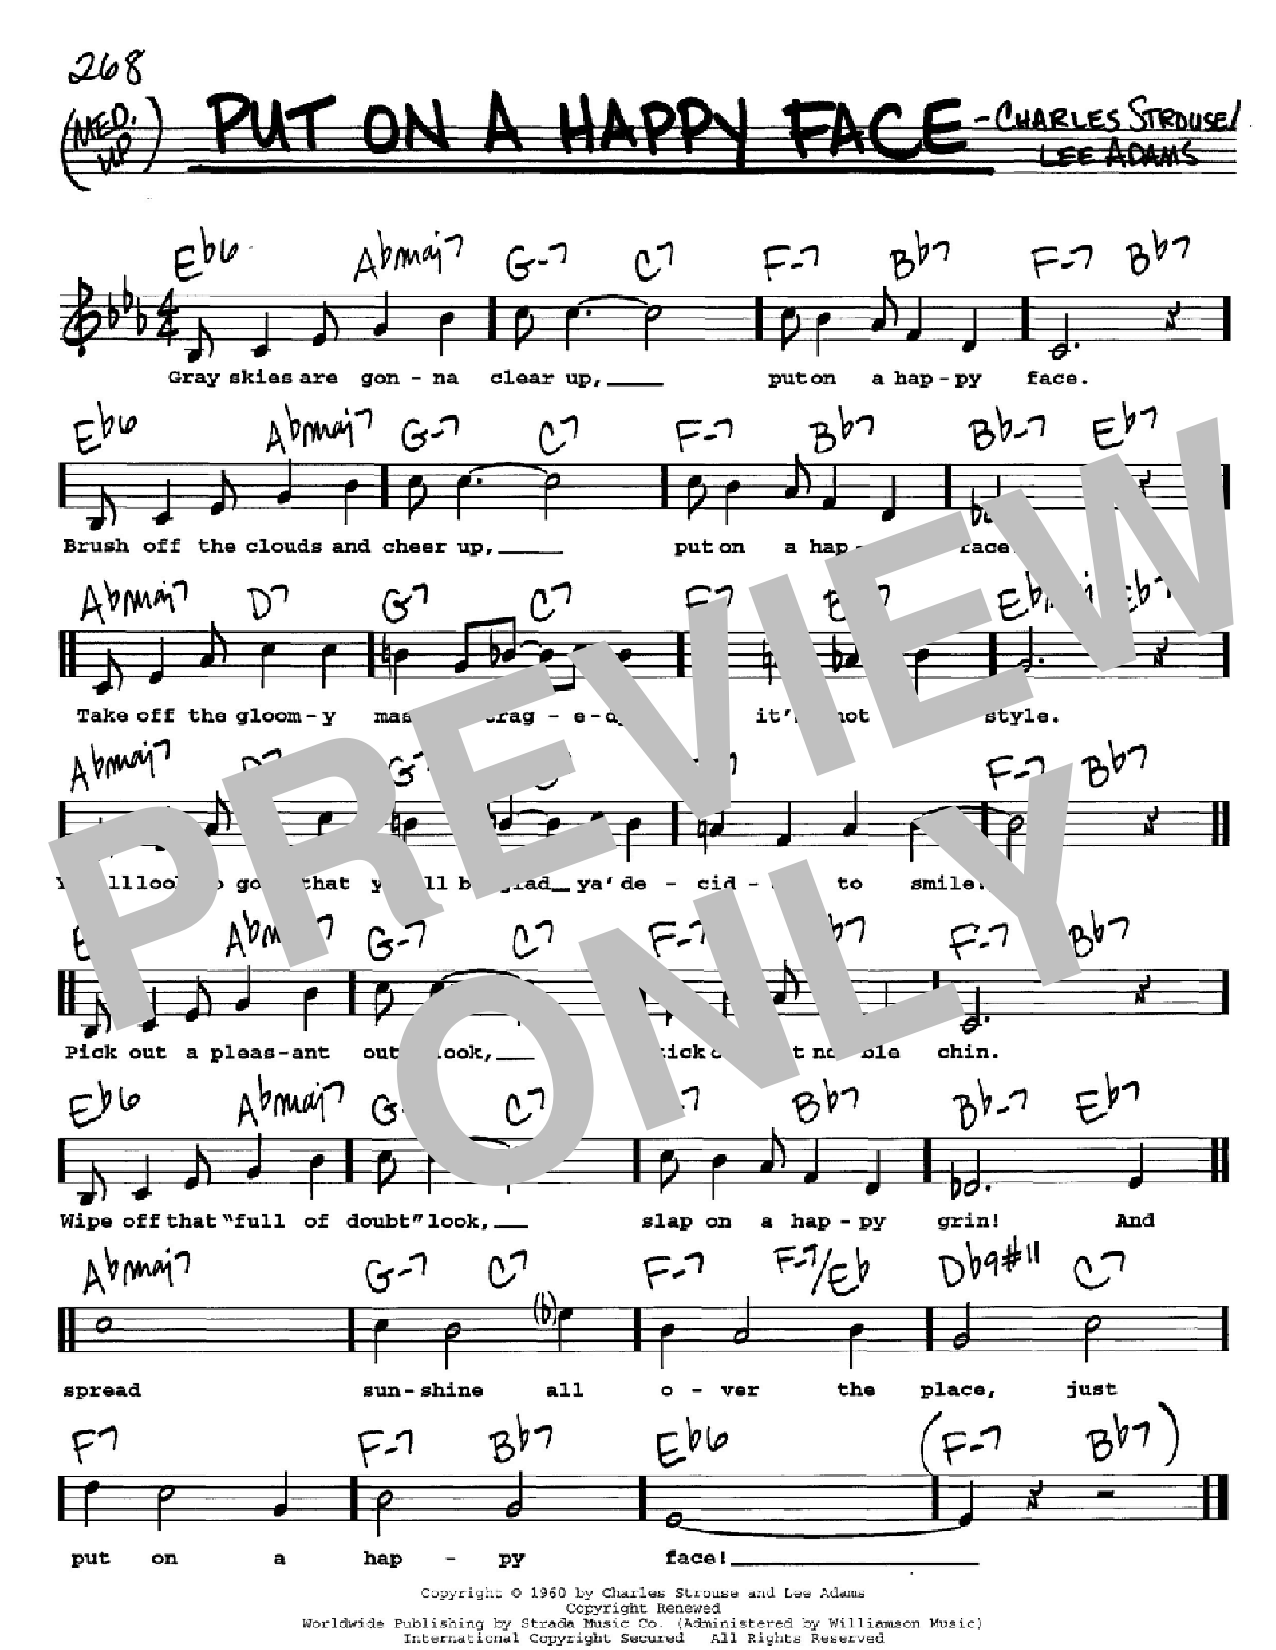 Download Charles Strouse Put On A Happy Face Sheet Music